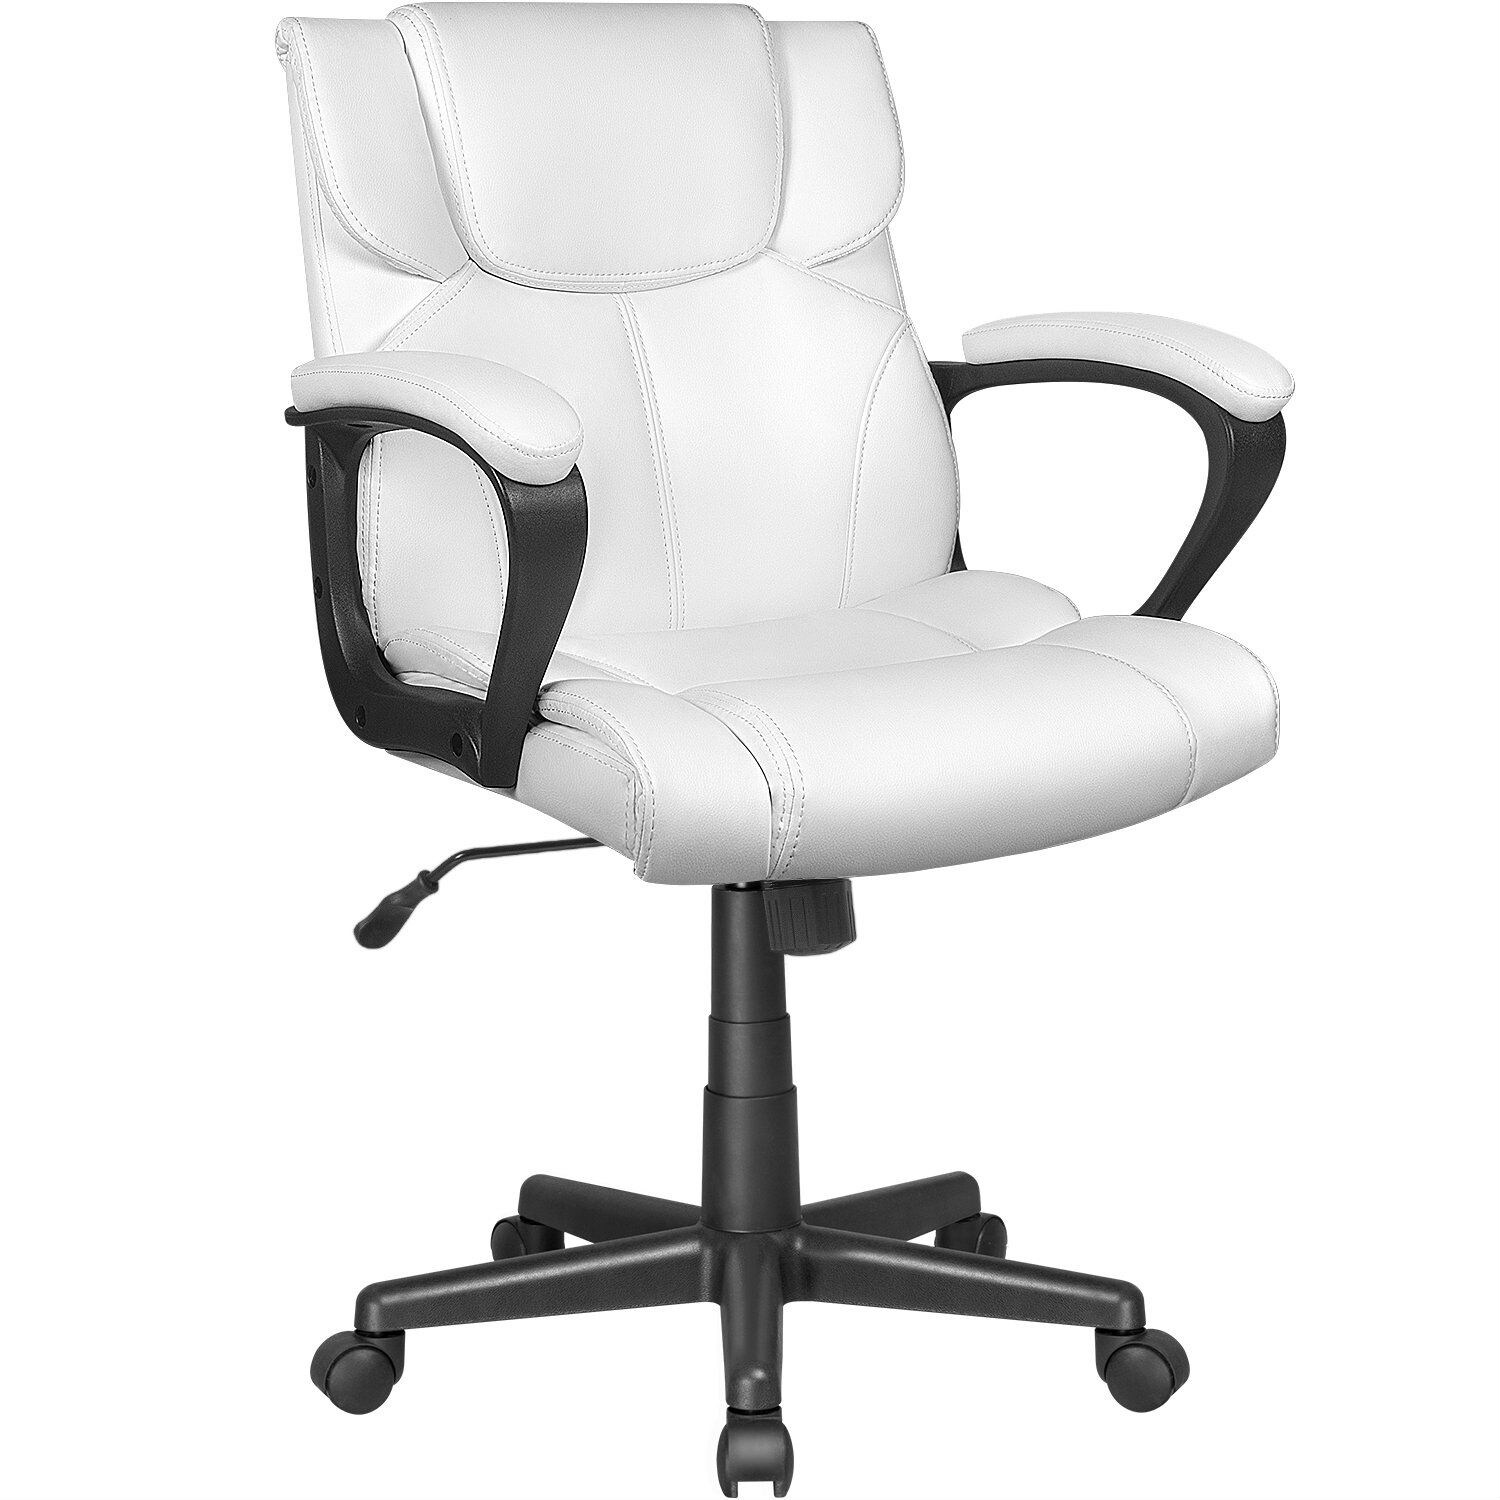 https://ak1.ostkcdn.com/images/products/is/images/direct/22e8d681ff24c7ab2525e2a77ac7392ced340ccb/Homall-Mid-Back-Office-Chair-Swivel-Computer-Task-Chair-with-Armrest-Ergonomic-Leather-Padded-Executive-Desk-Chair.jpg